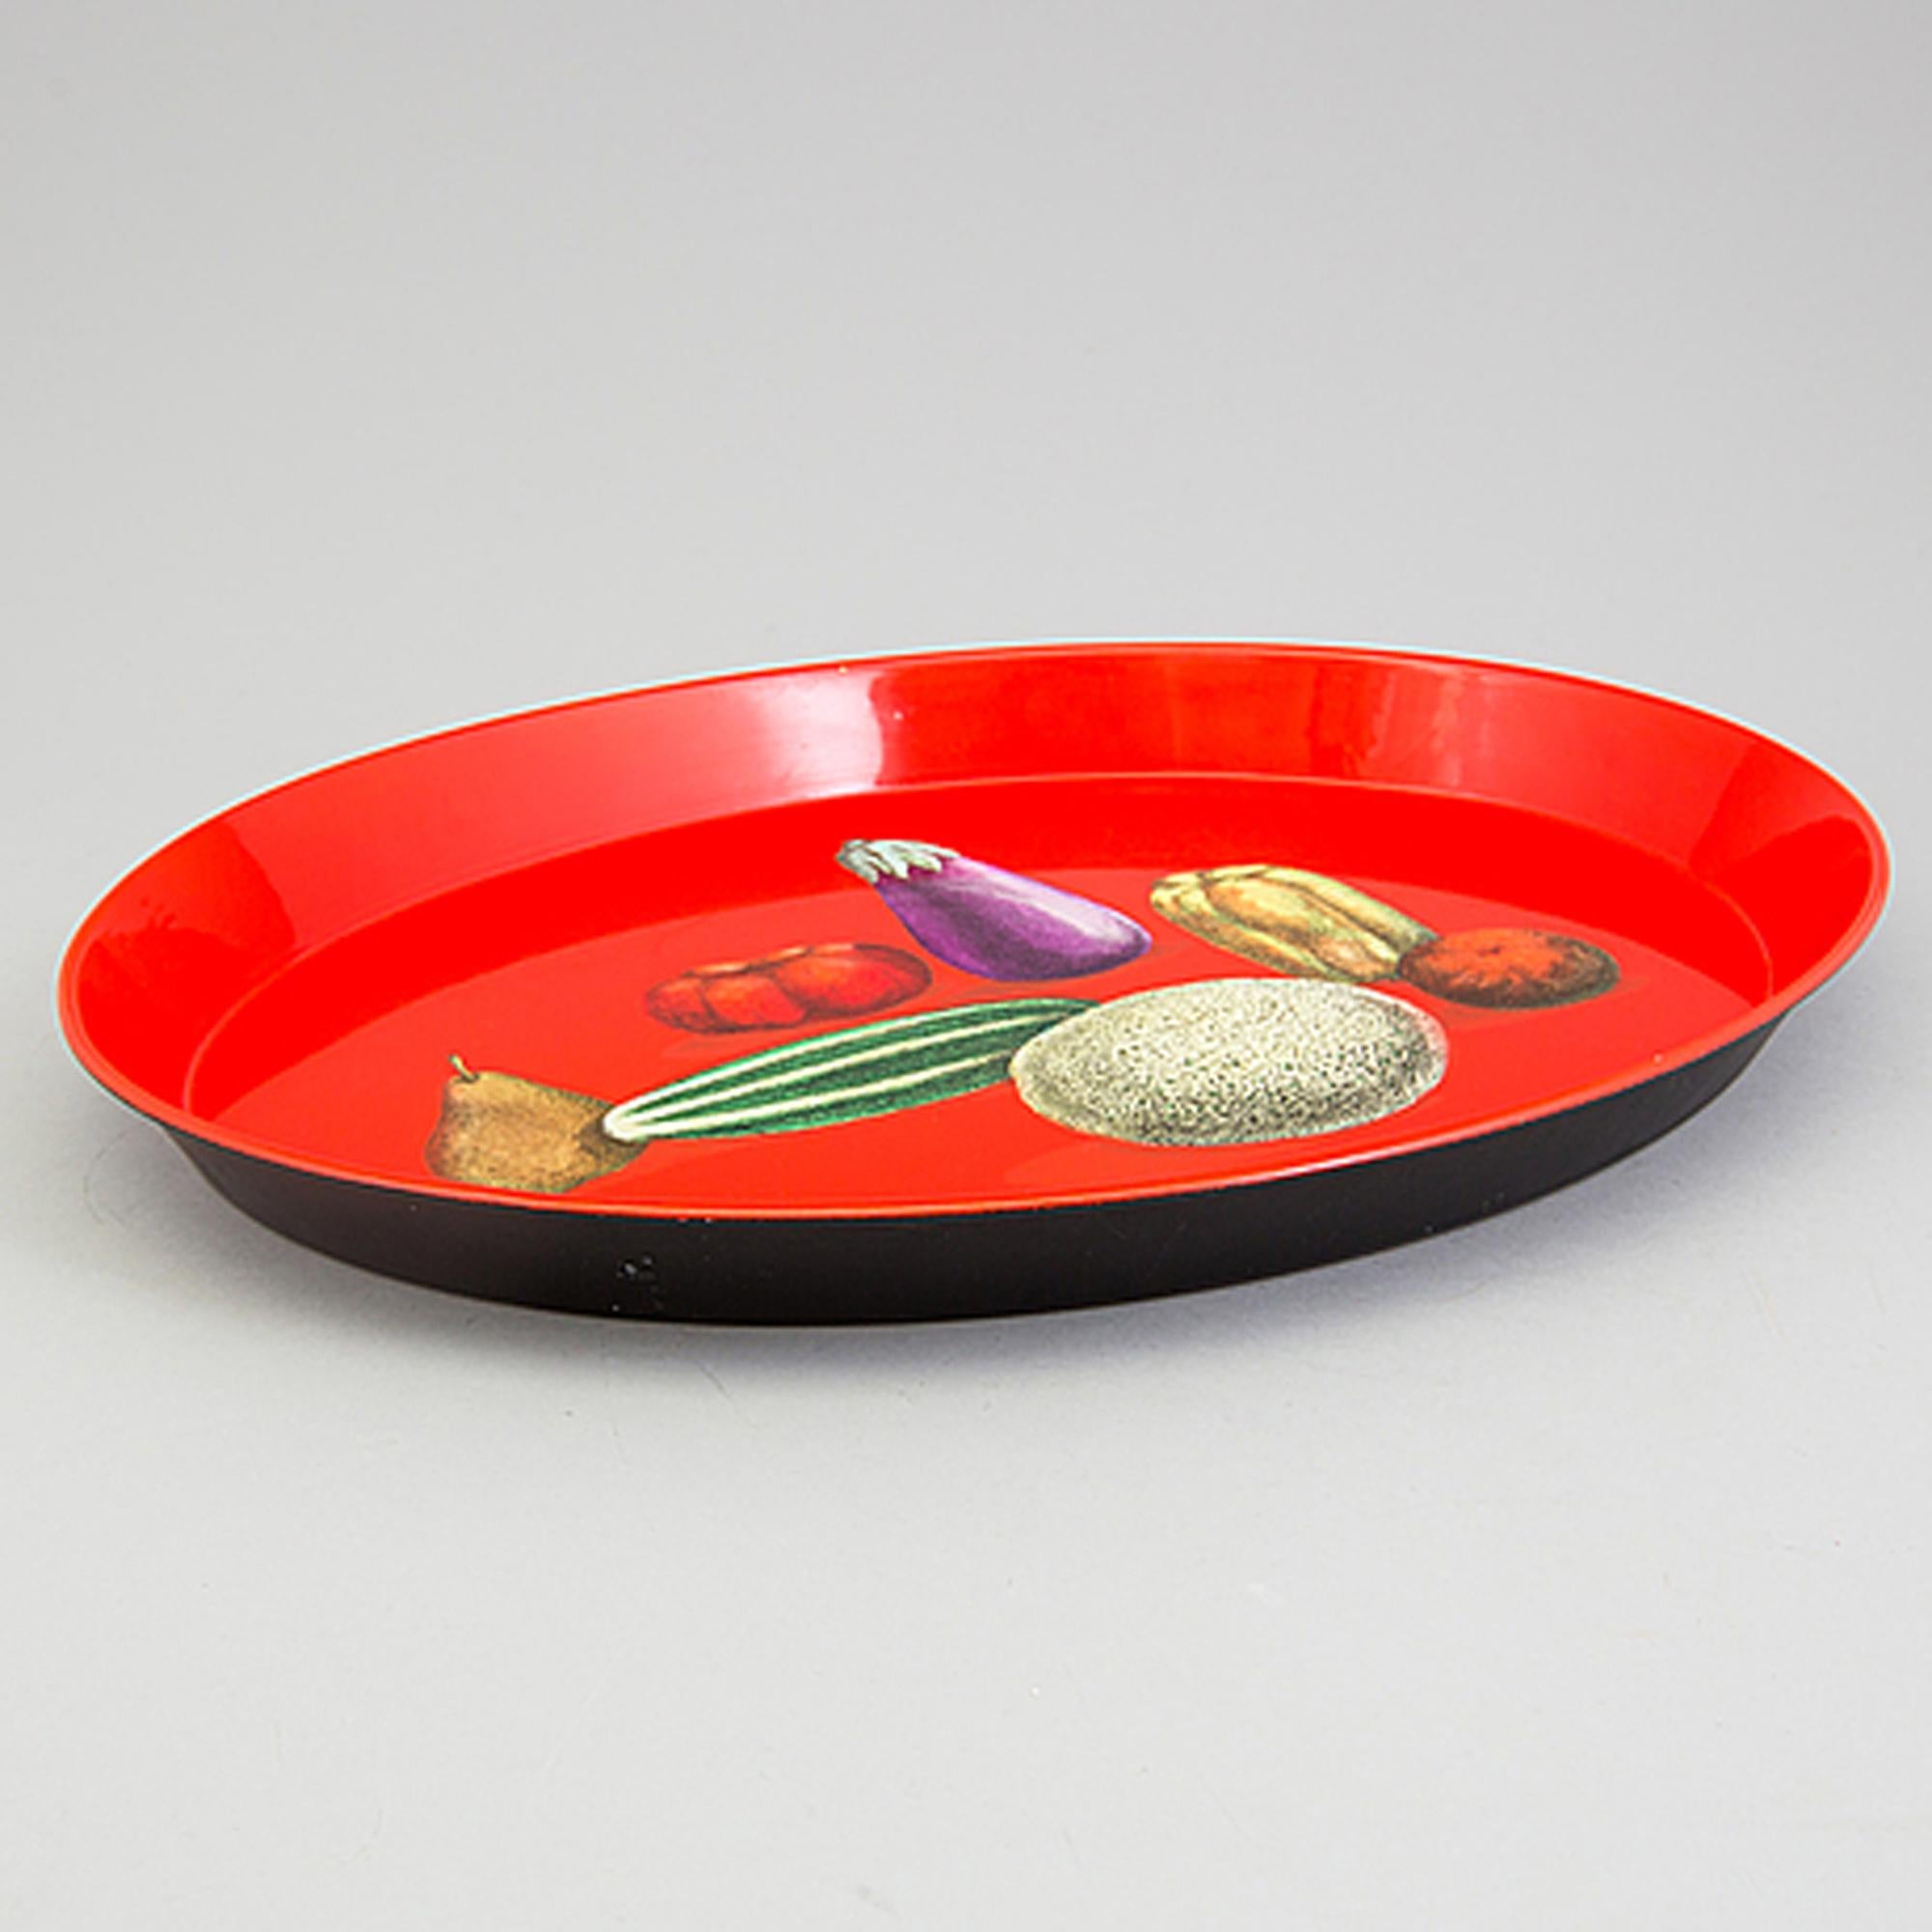 Mid-Century Modern Piero Fornasetti Tray with Still Life, Natura Morta Pattern, Early, 1950s For Sale